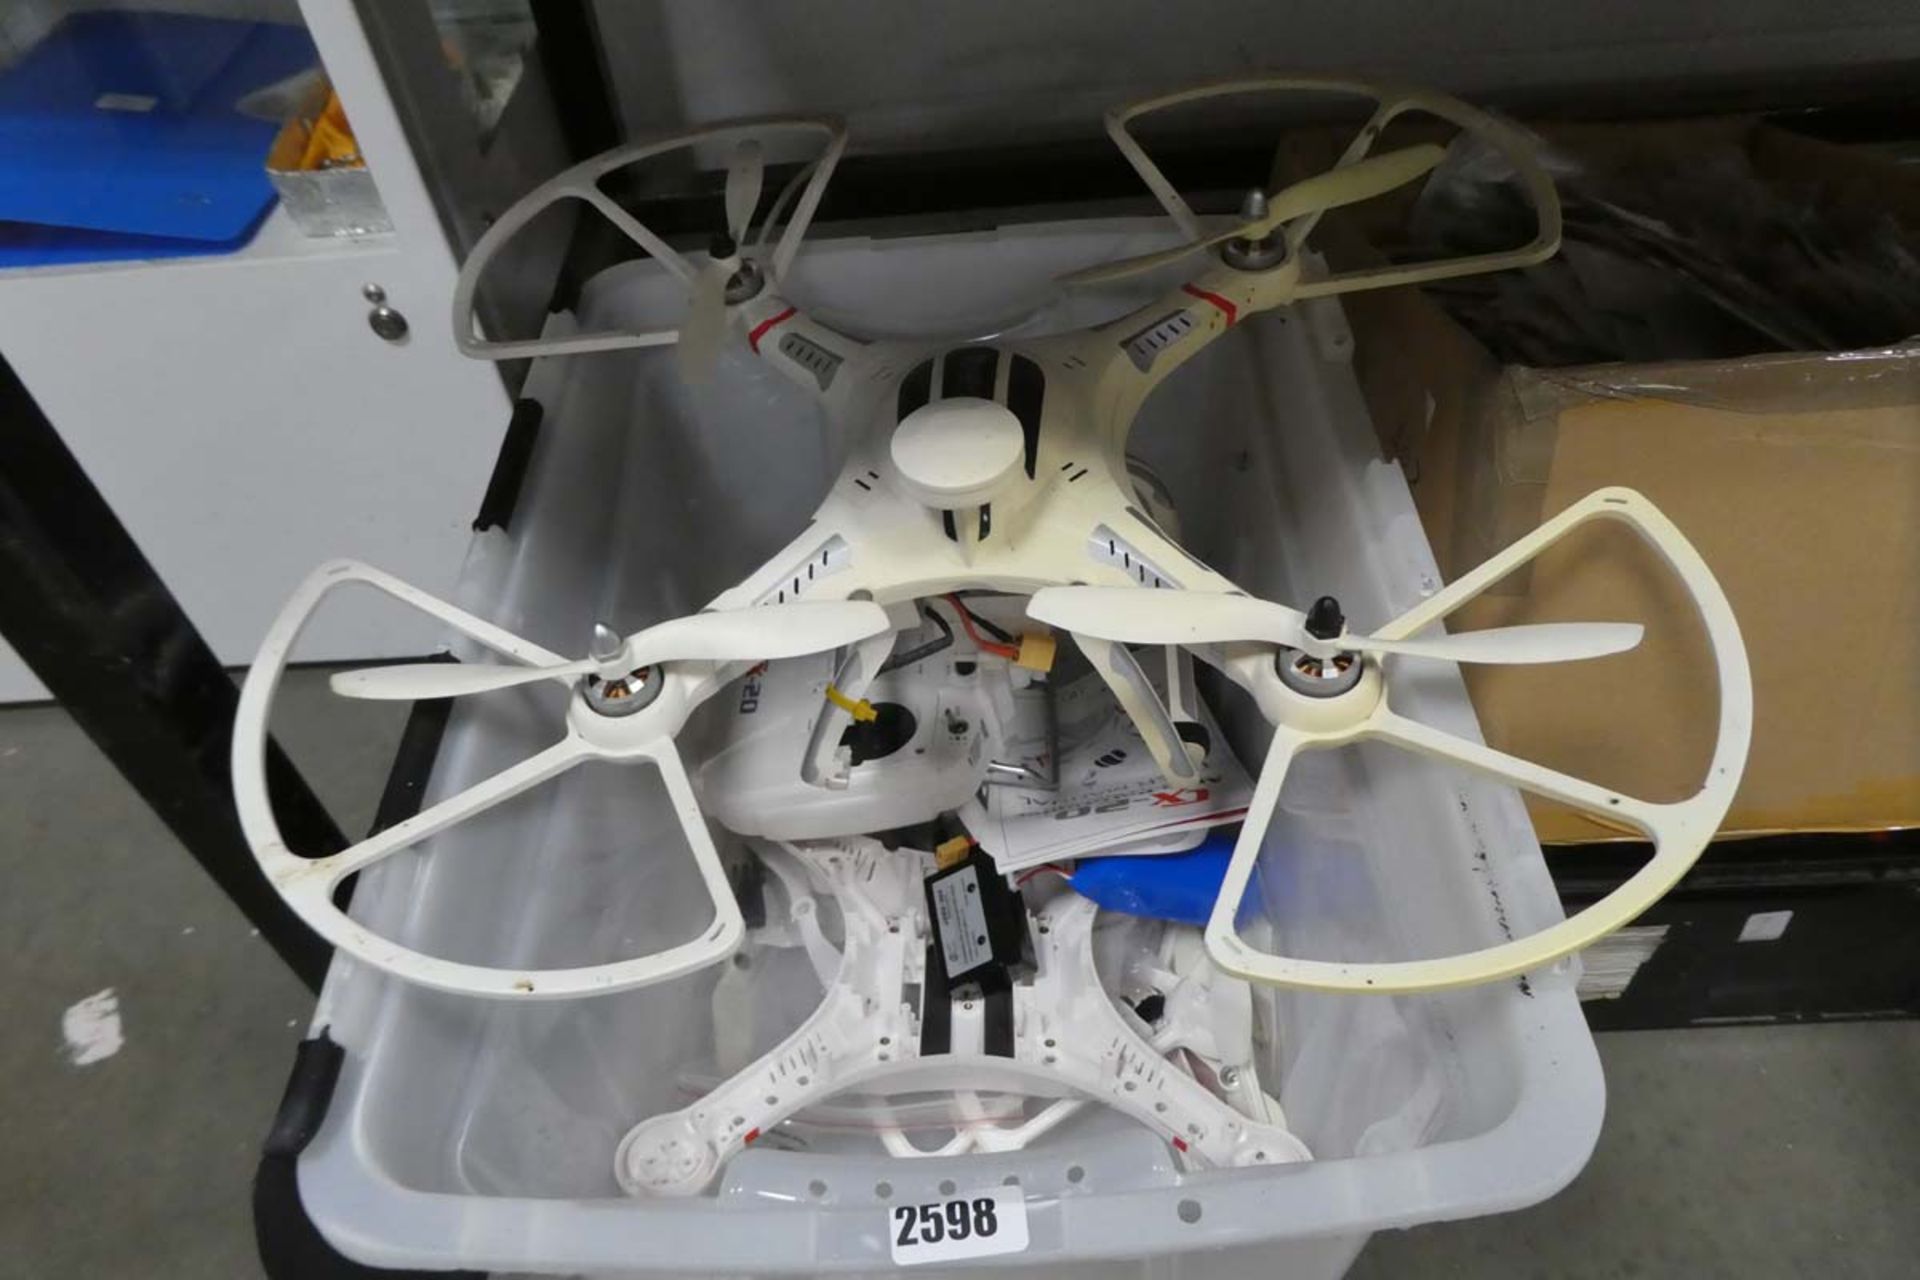 CX20 drone with accessories